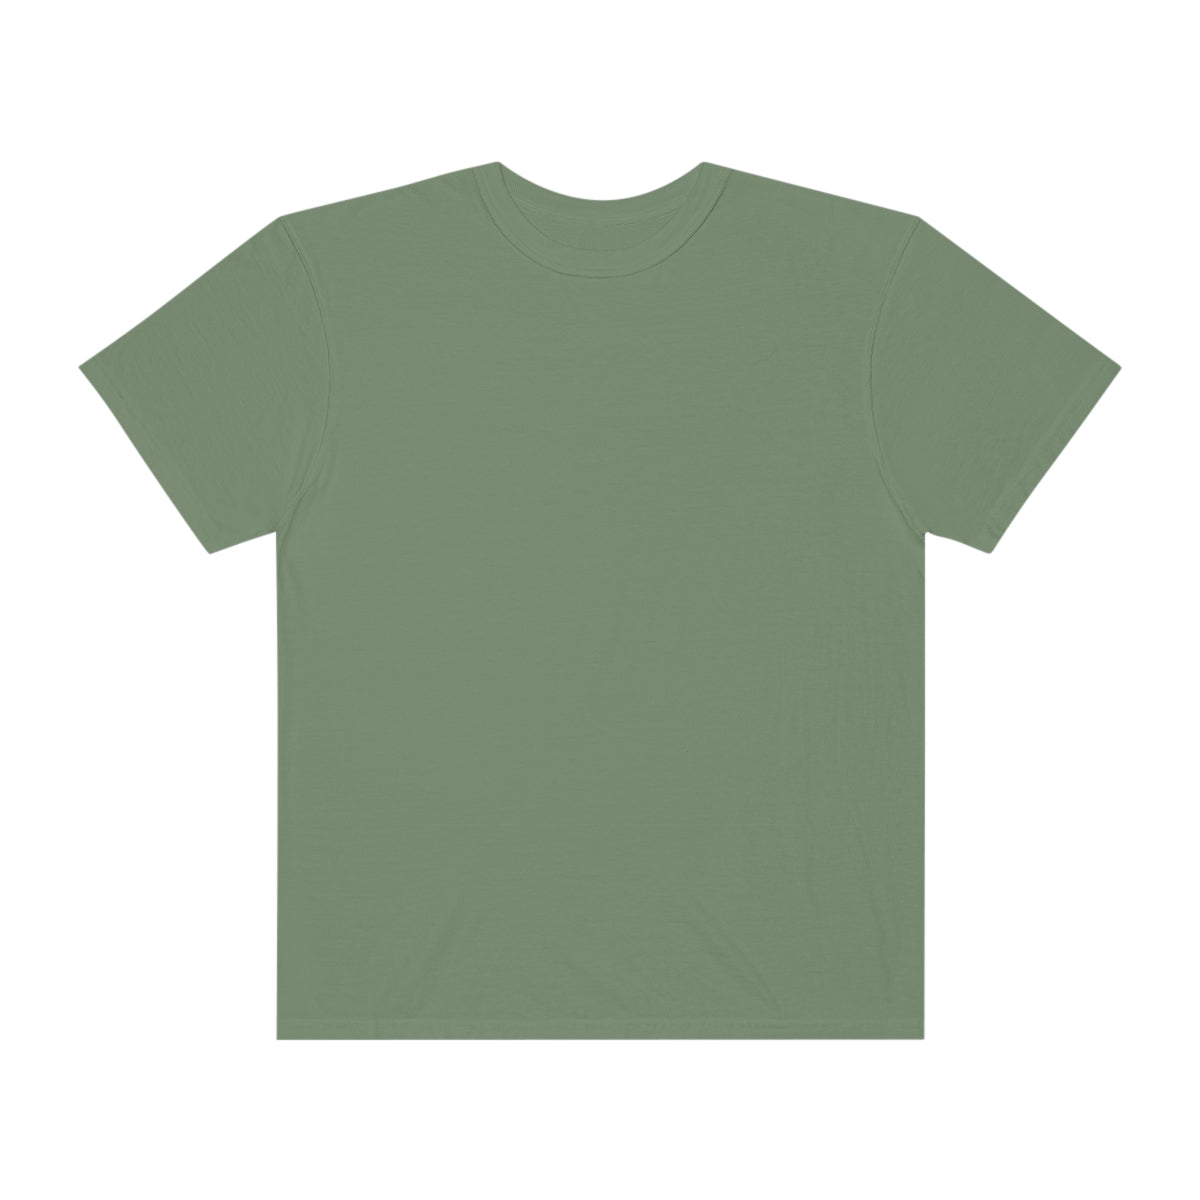 Build Your Own Tee (Comfort Colors)